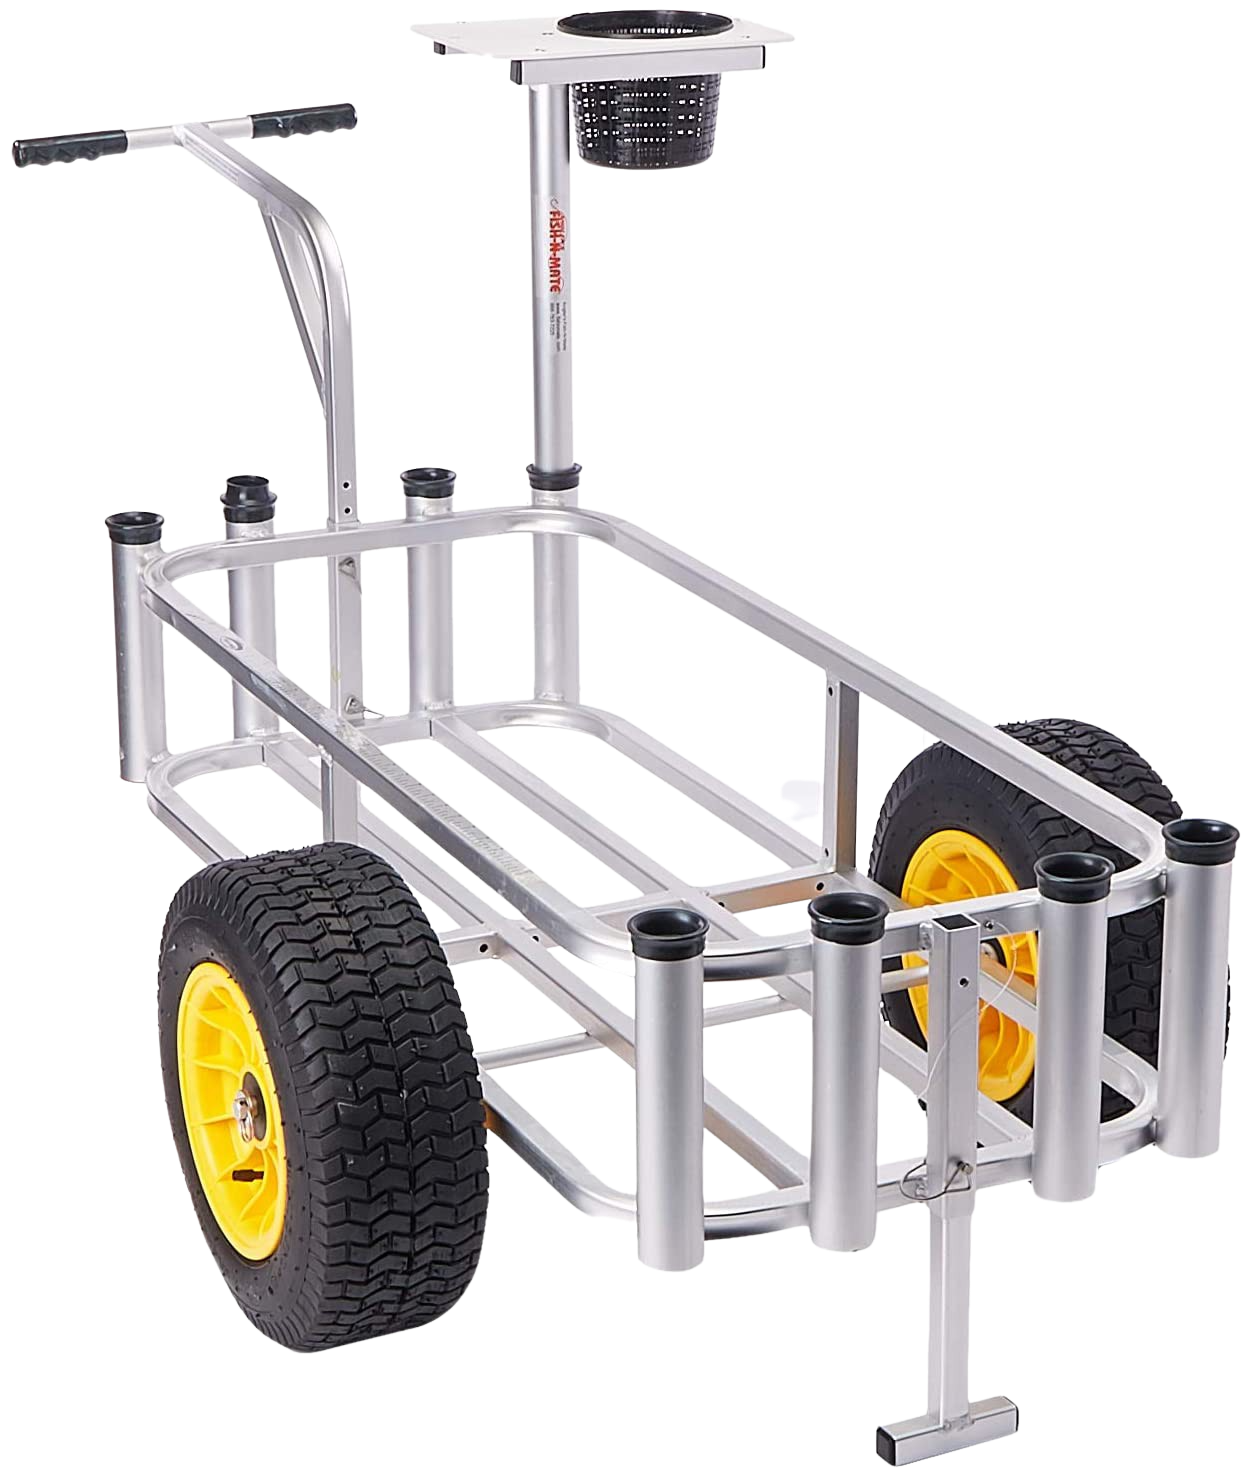 Angler's Fish-N-Mate 143 Pier Cart with Cutting Board and Bait Basket –  FactoryPure